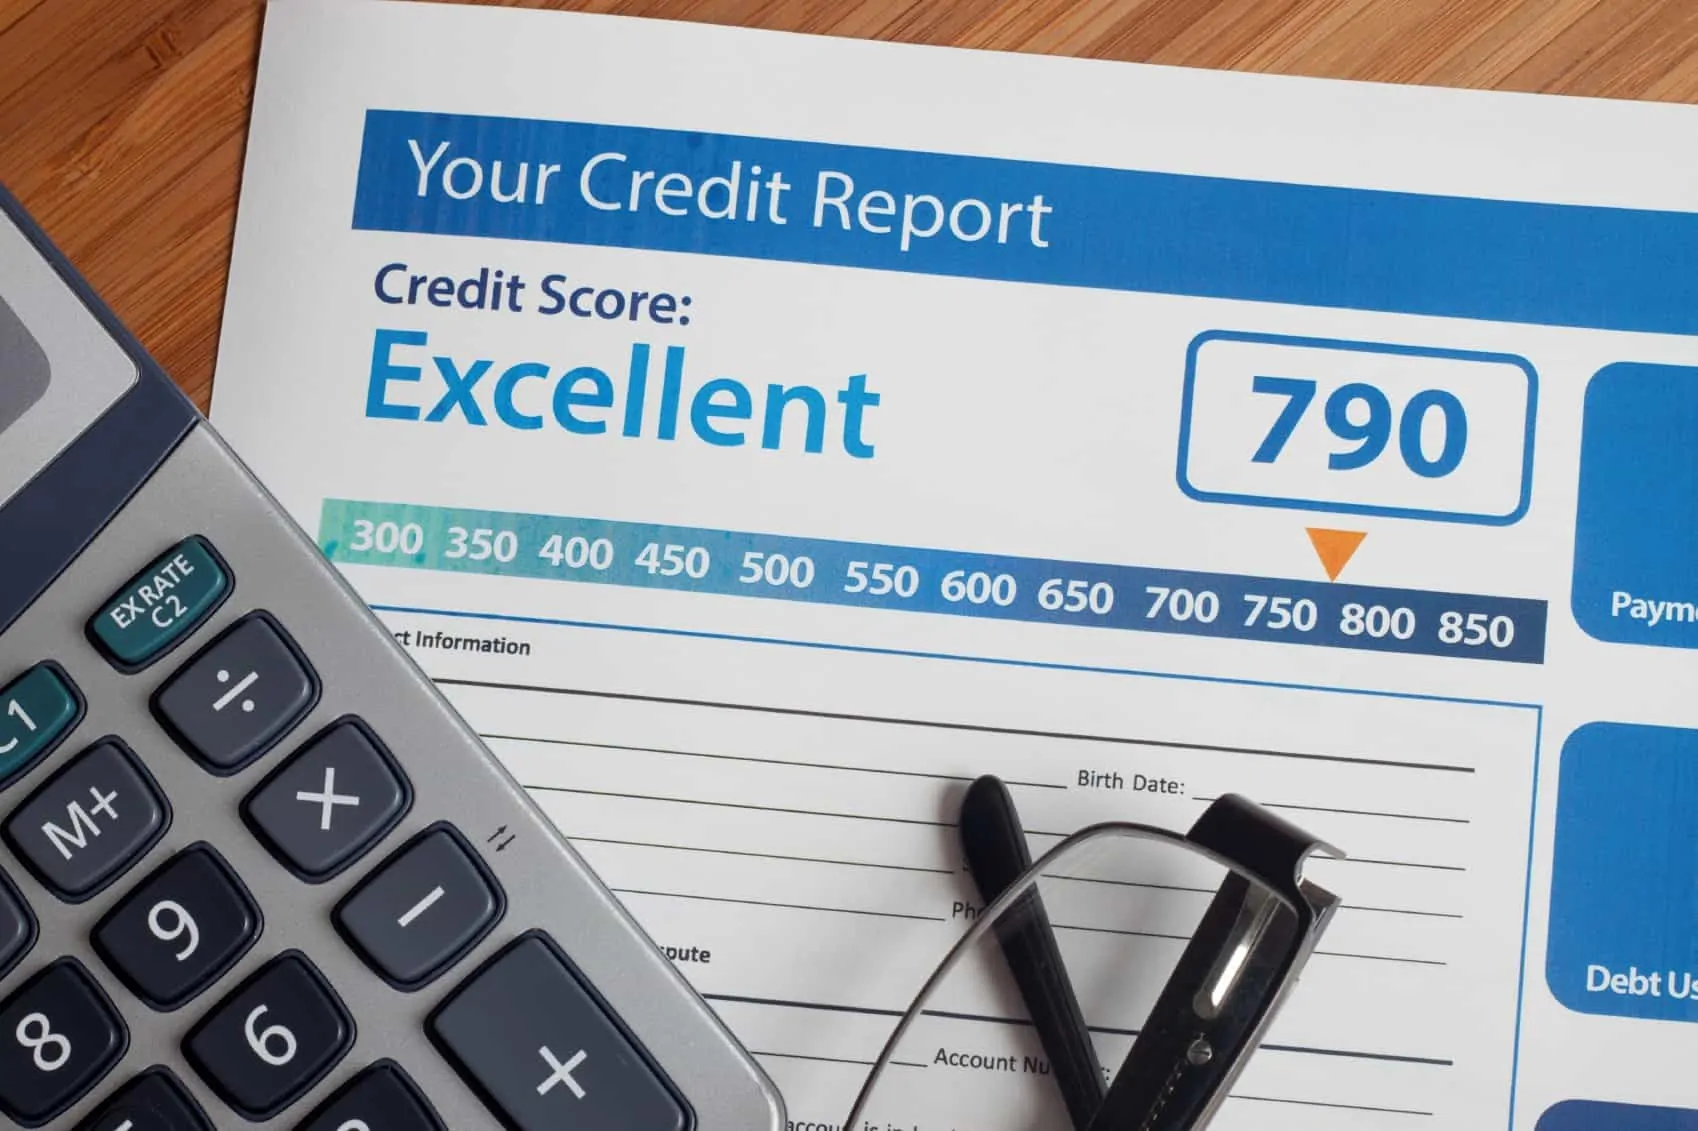 Part 2 – Credit Scores 101: What Determines Your Score and How to Keep It High